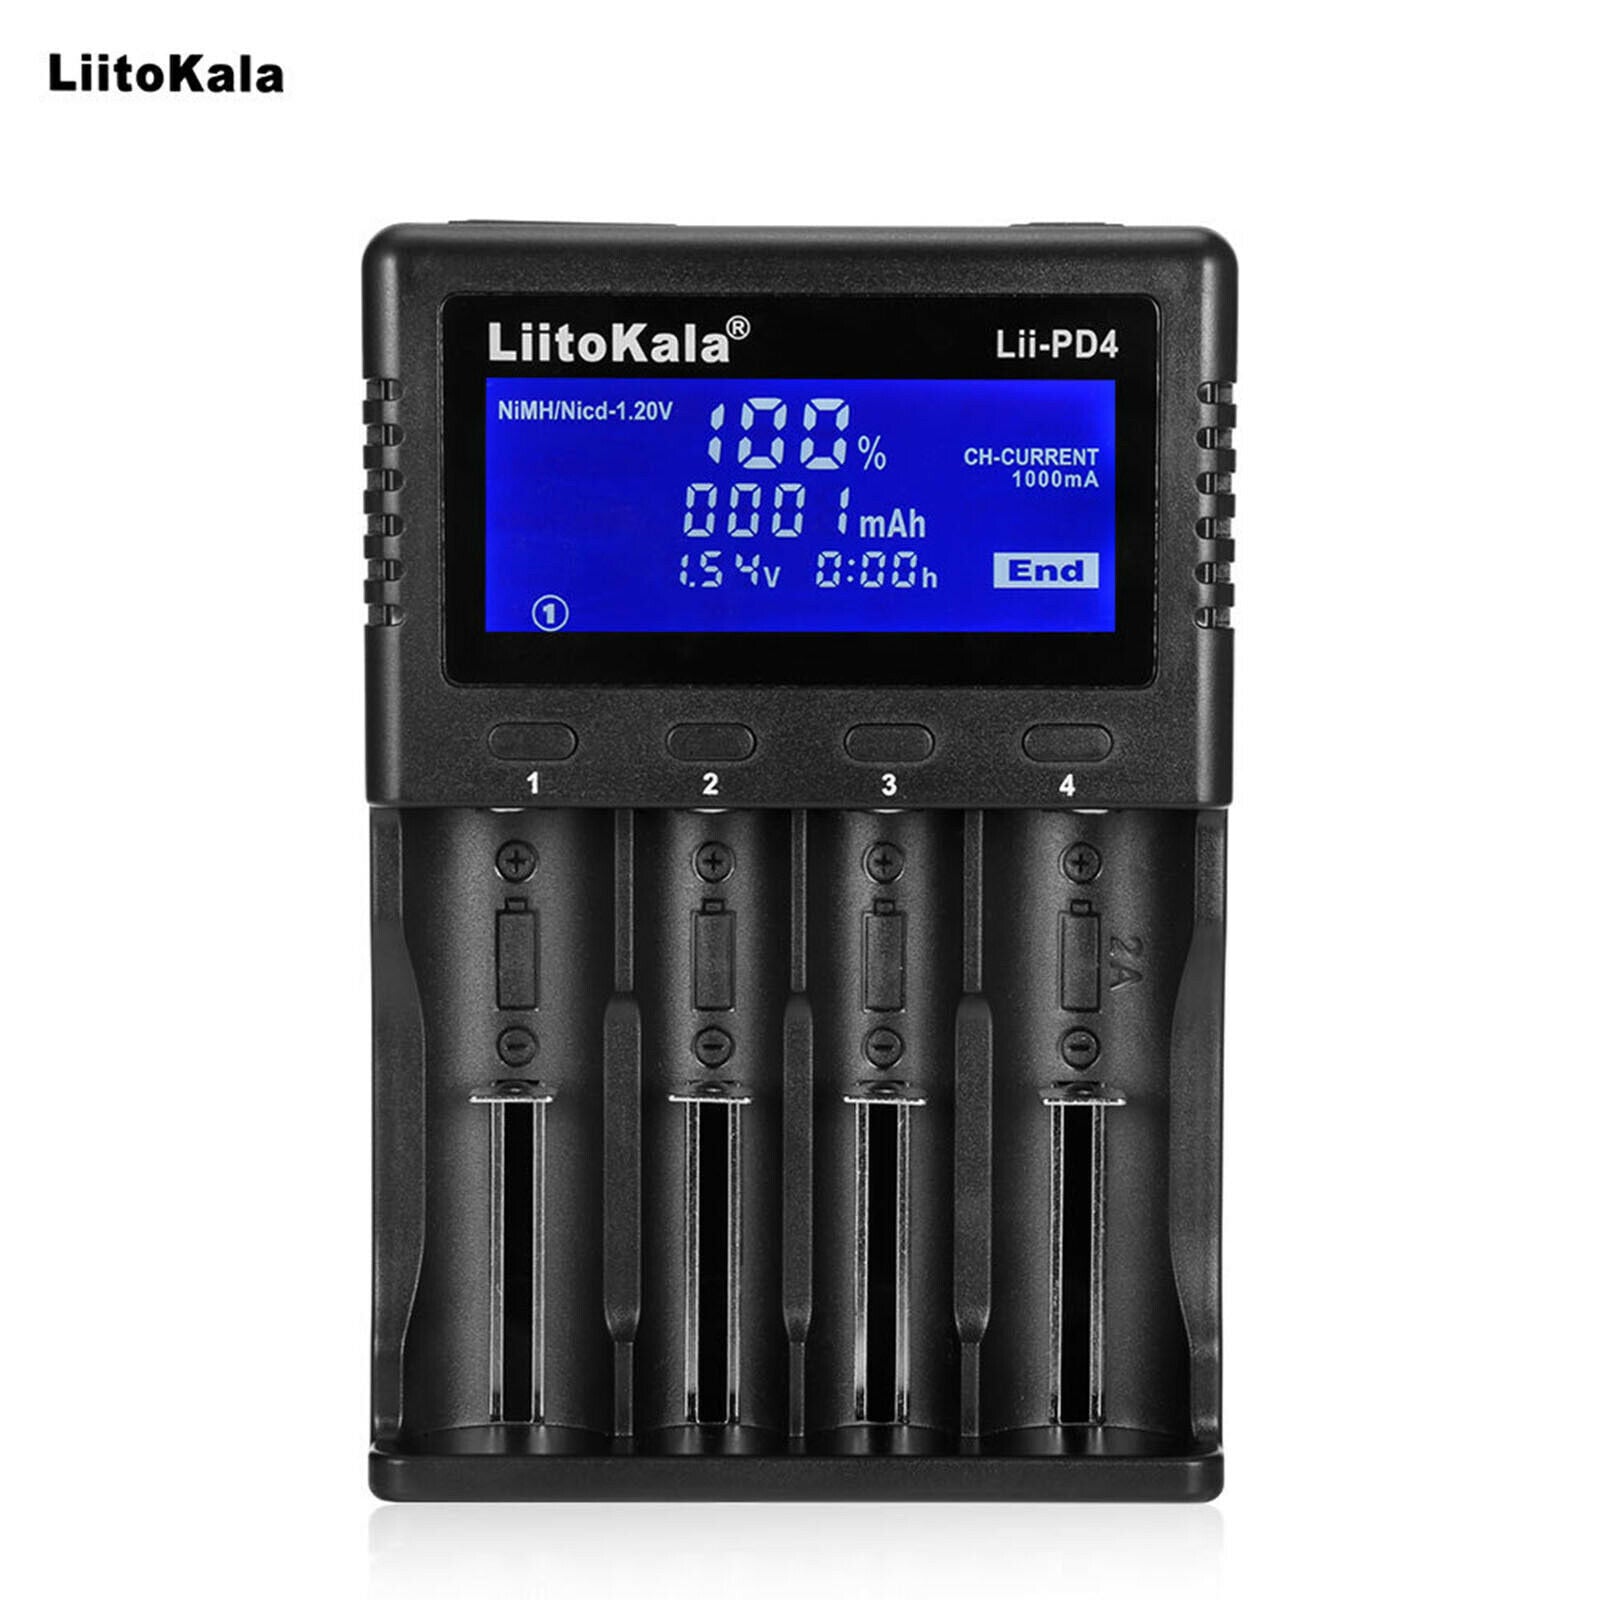 Lii-PD4 4 Slots Lithium Battery Charger for 18490/18350 LCD Display Compact